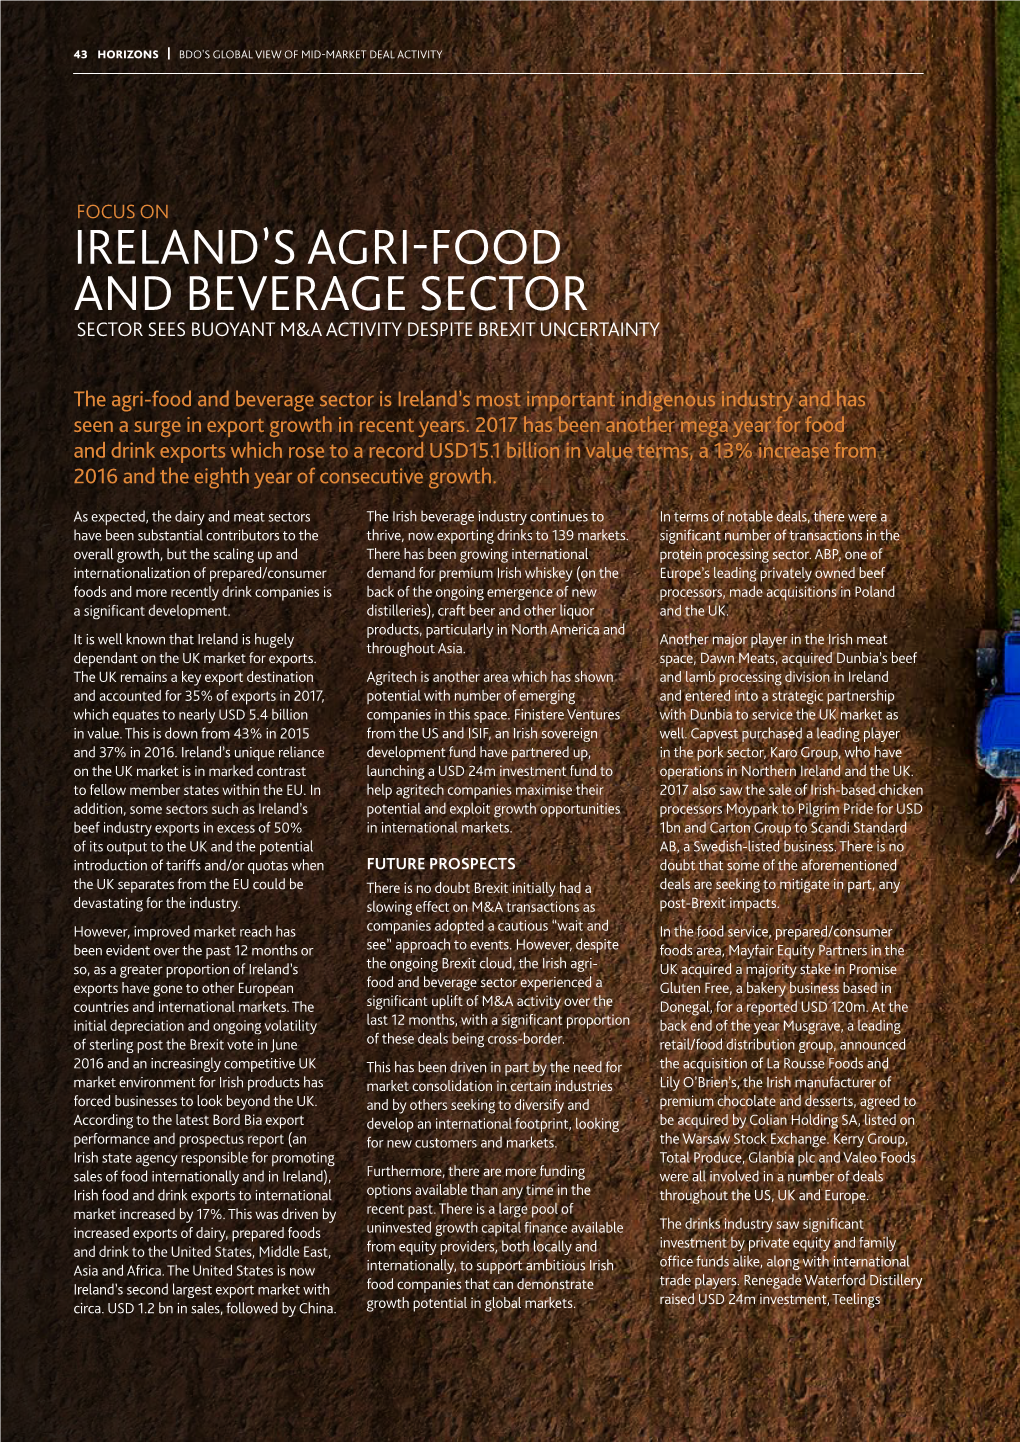 Ireland's Agri-Food and Beverage Sector